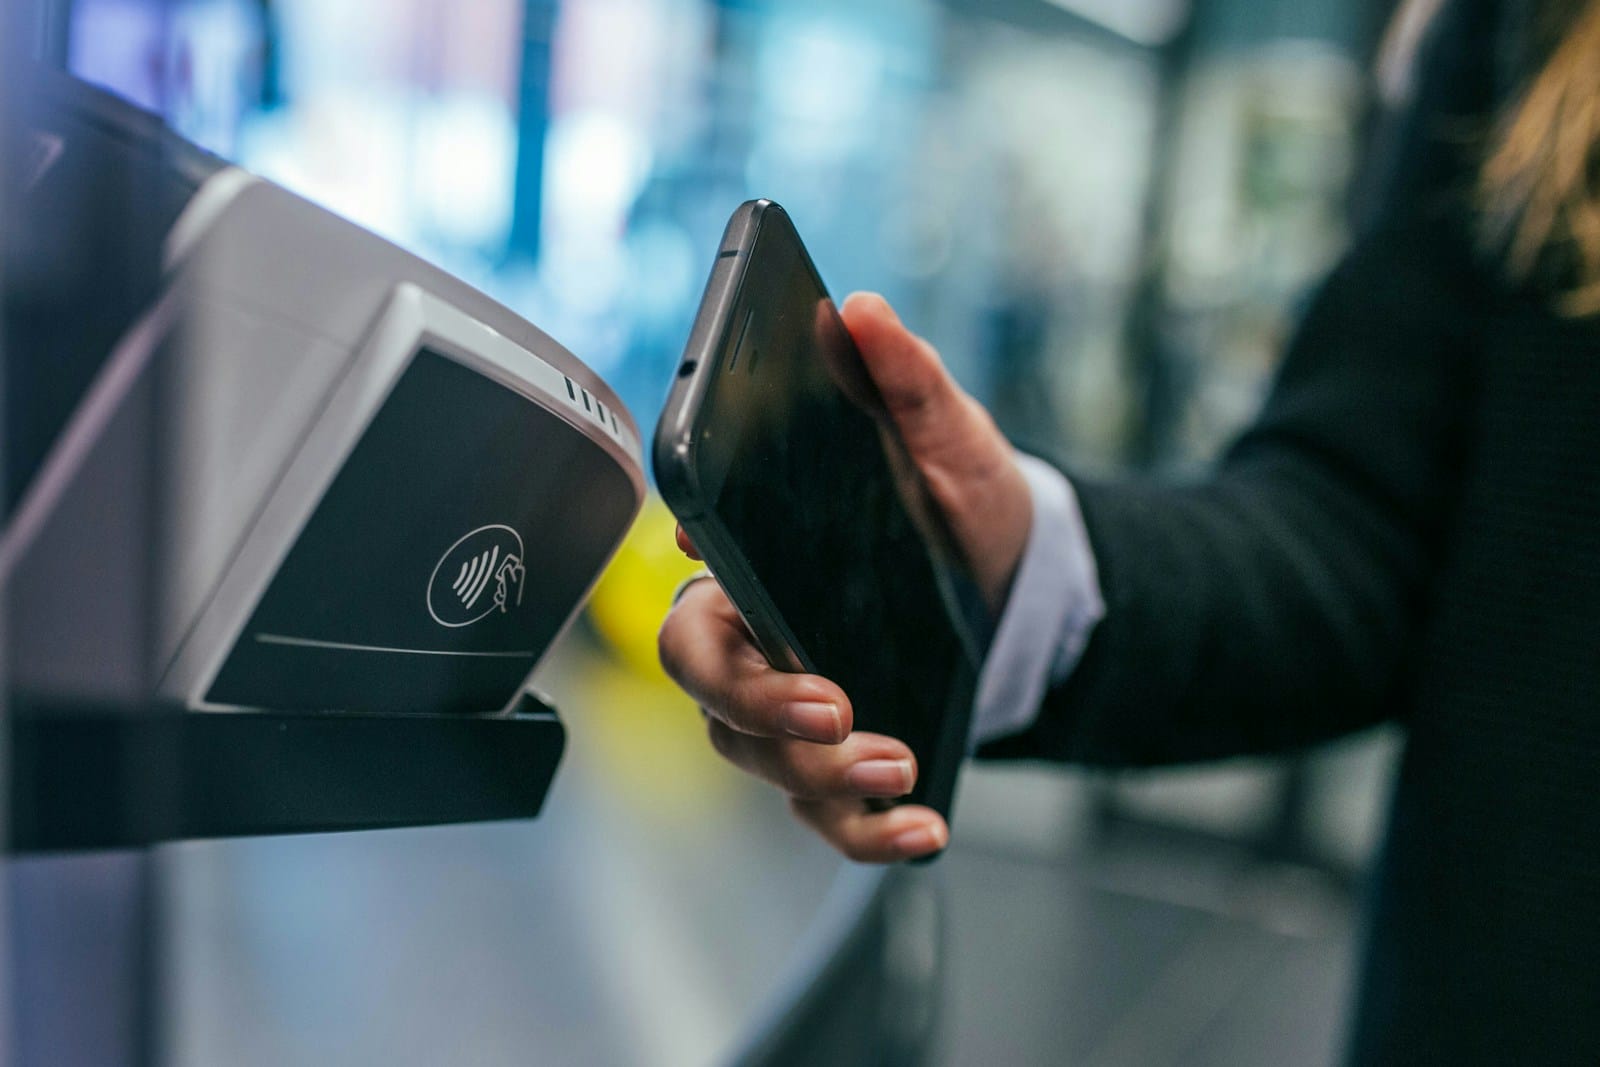 MagicCube Partners with Shift4 to Offer Android Tap-to-Pay Solution